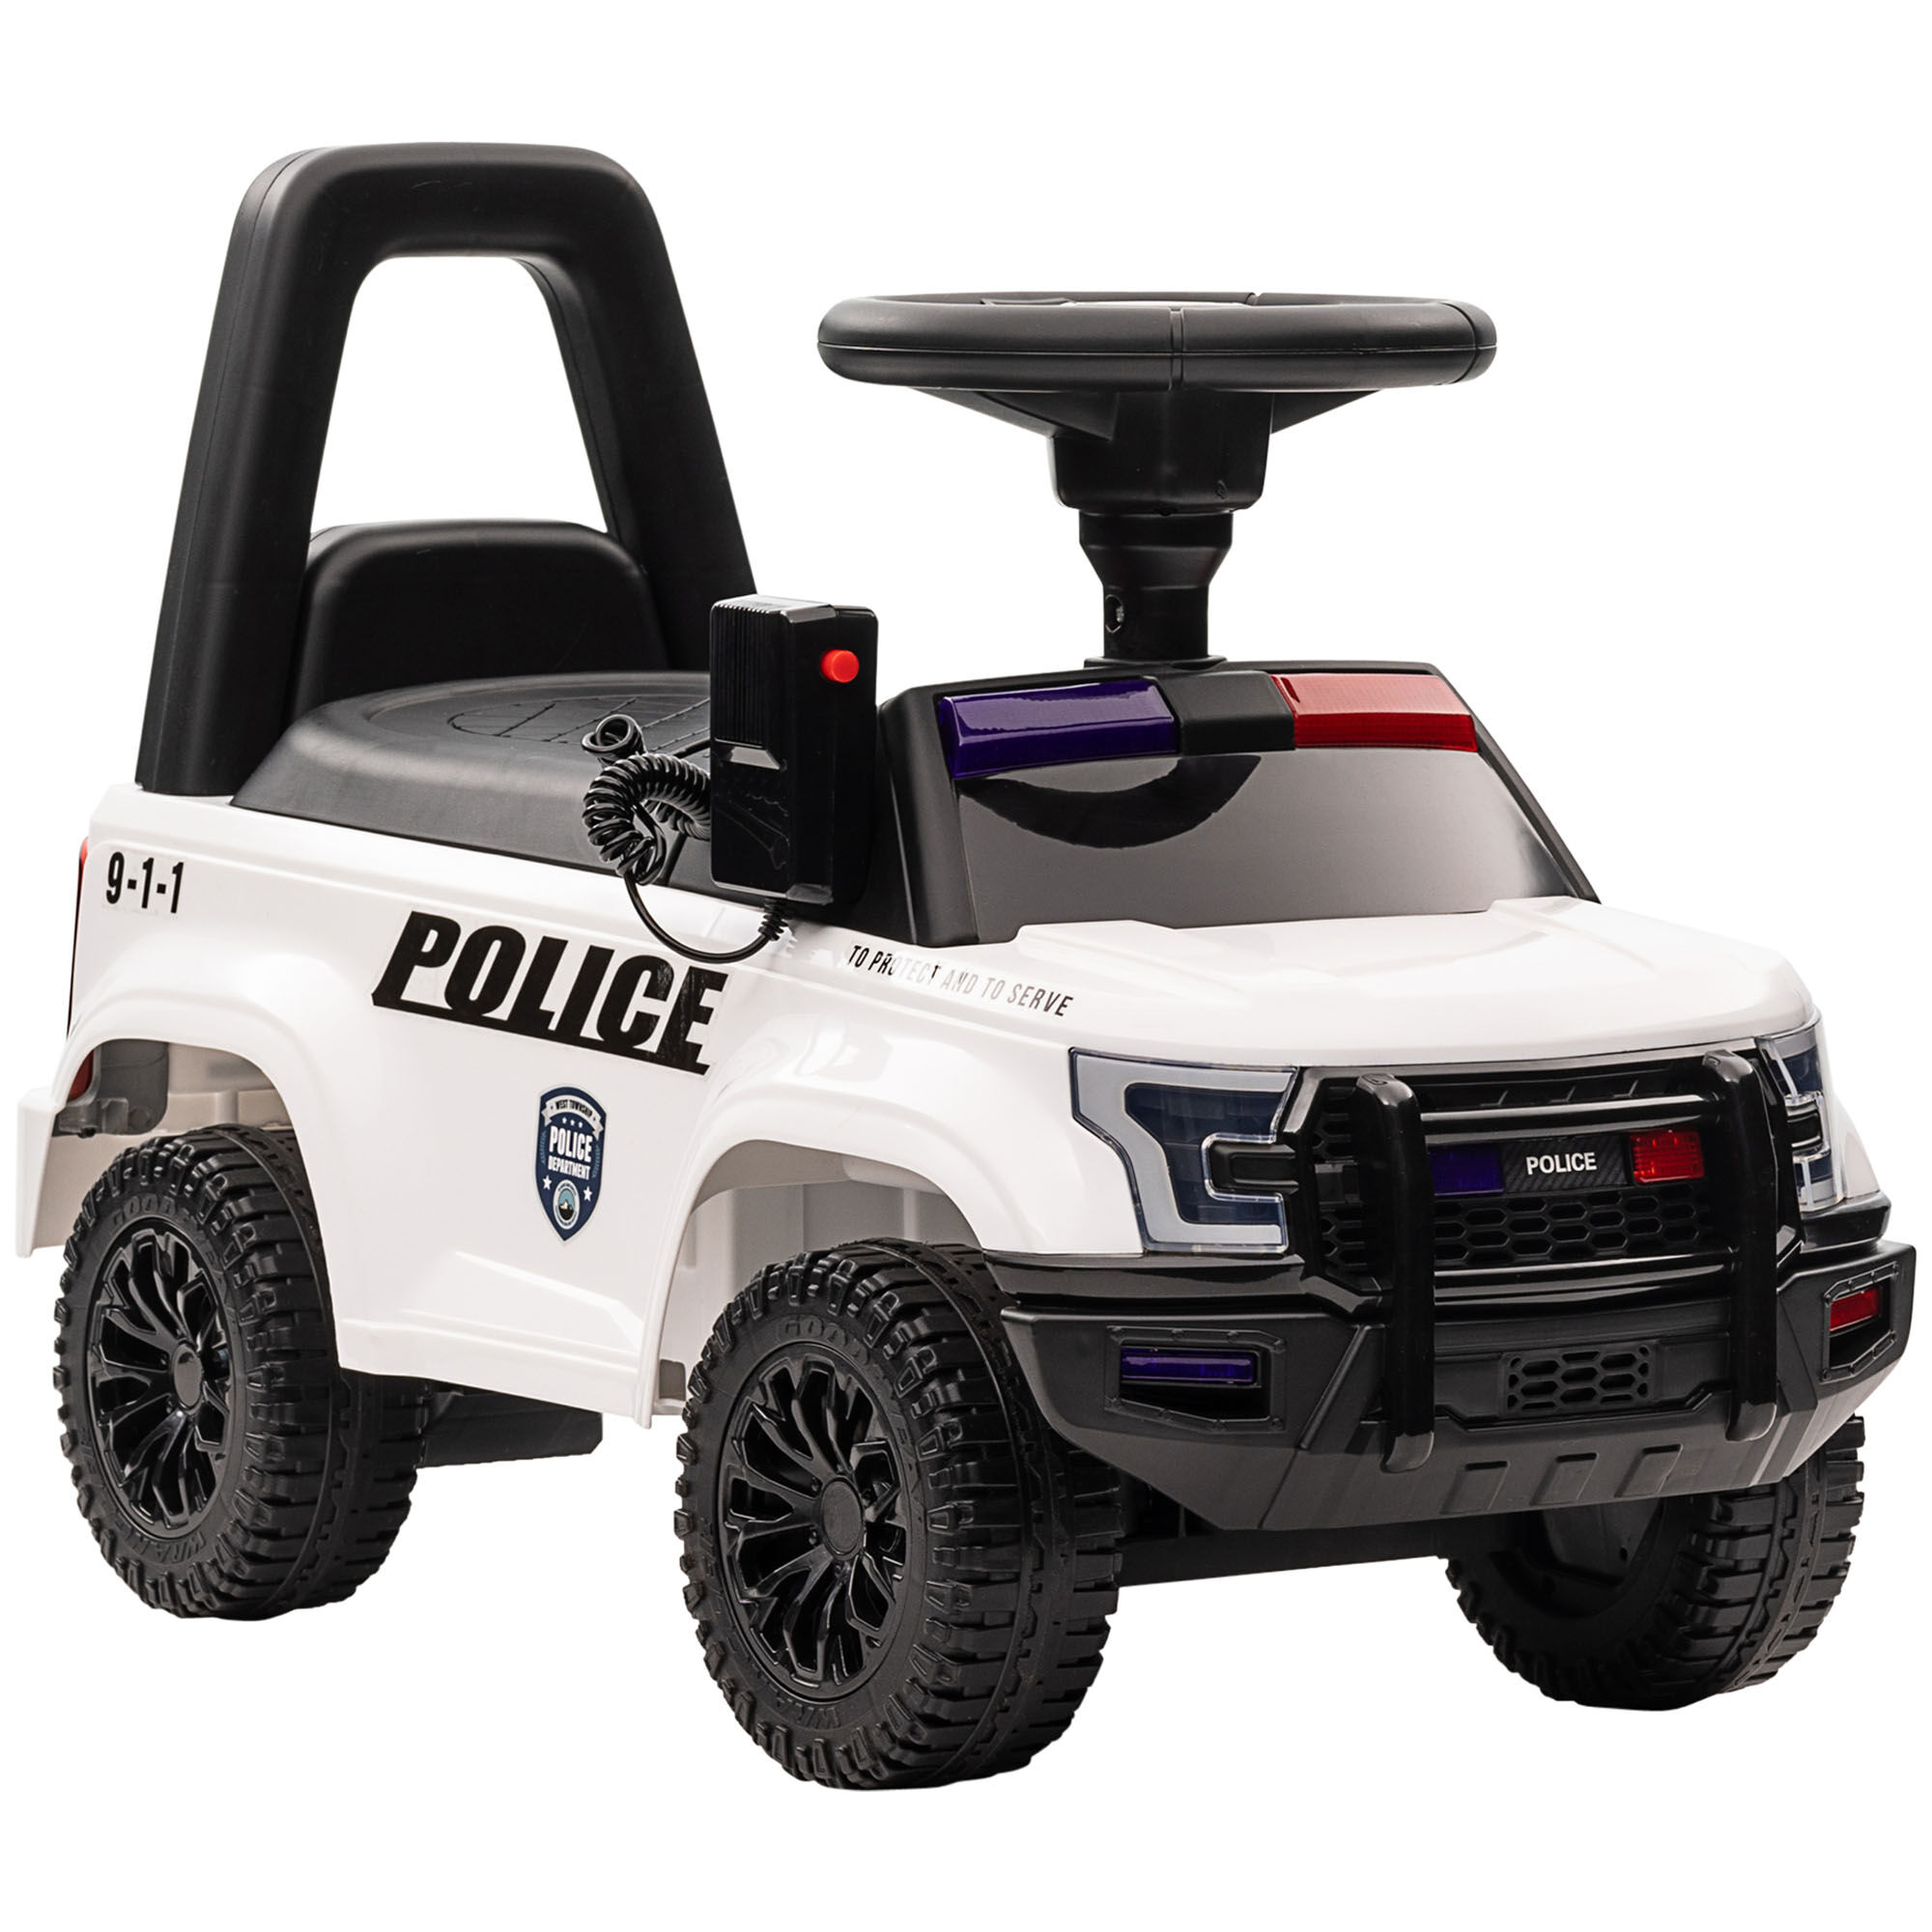 Aosom White Ride-On Push Police Car for Toddlers, Foot-to-Floor Sliding Toy, Hidden Storage, Removable Backrest for Ages 1.5-5   Aosom.com